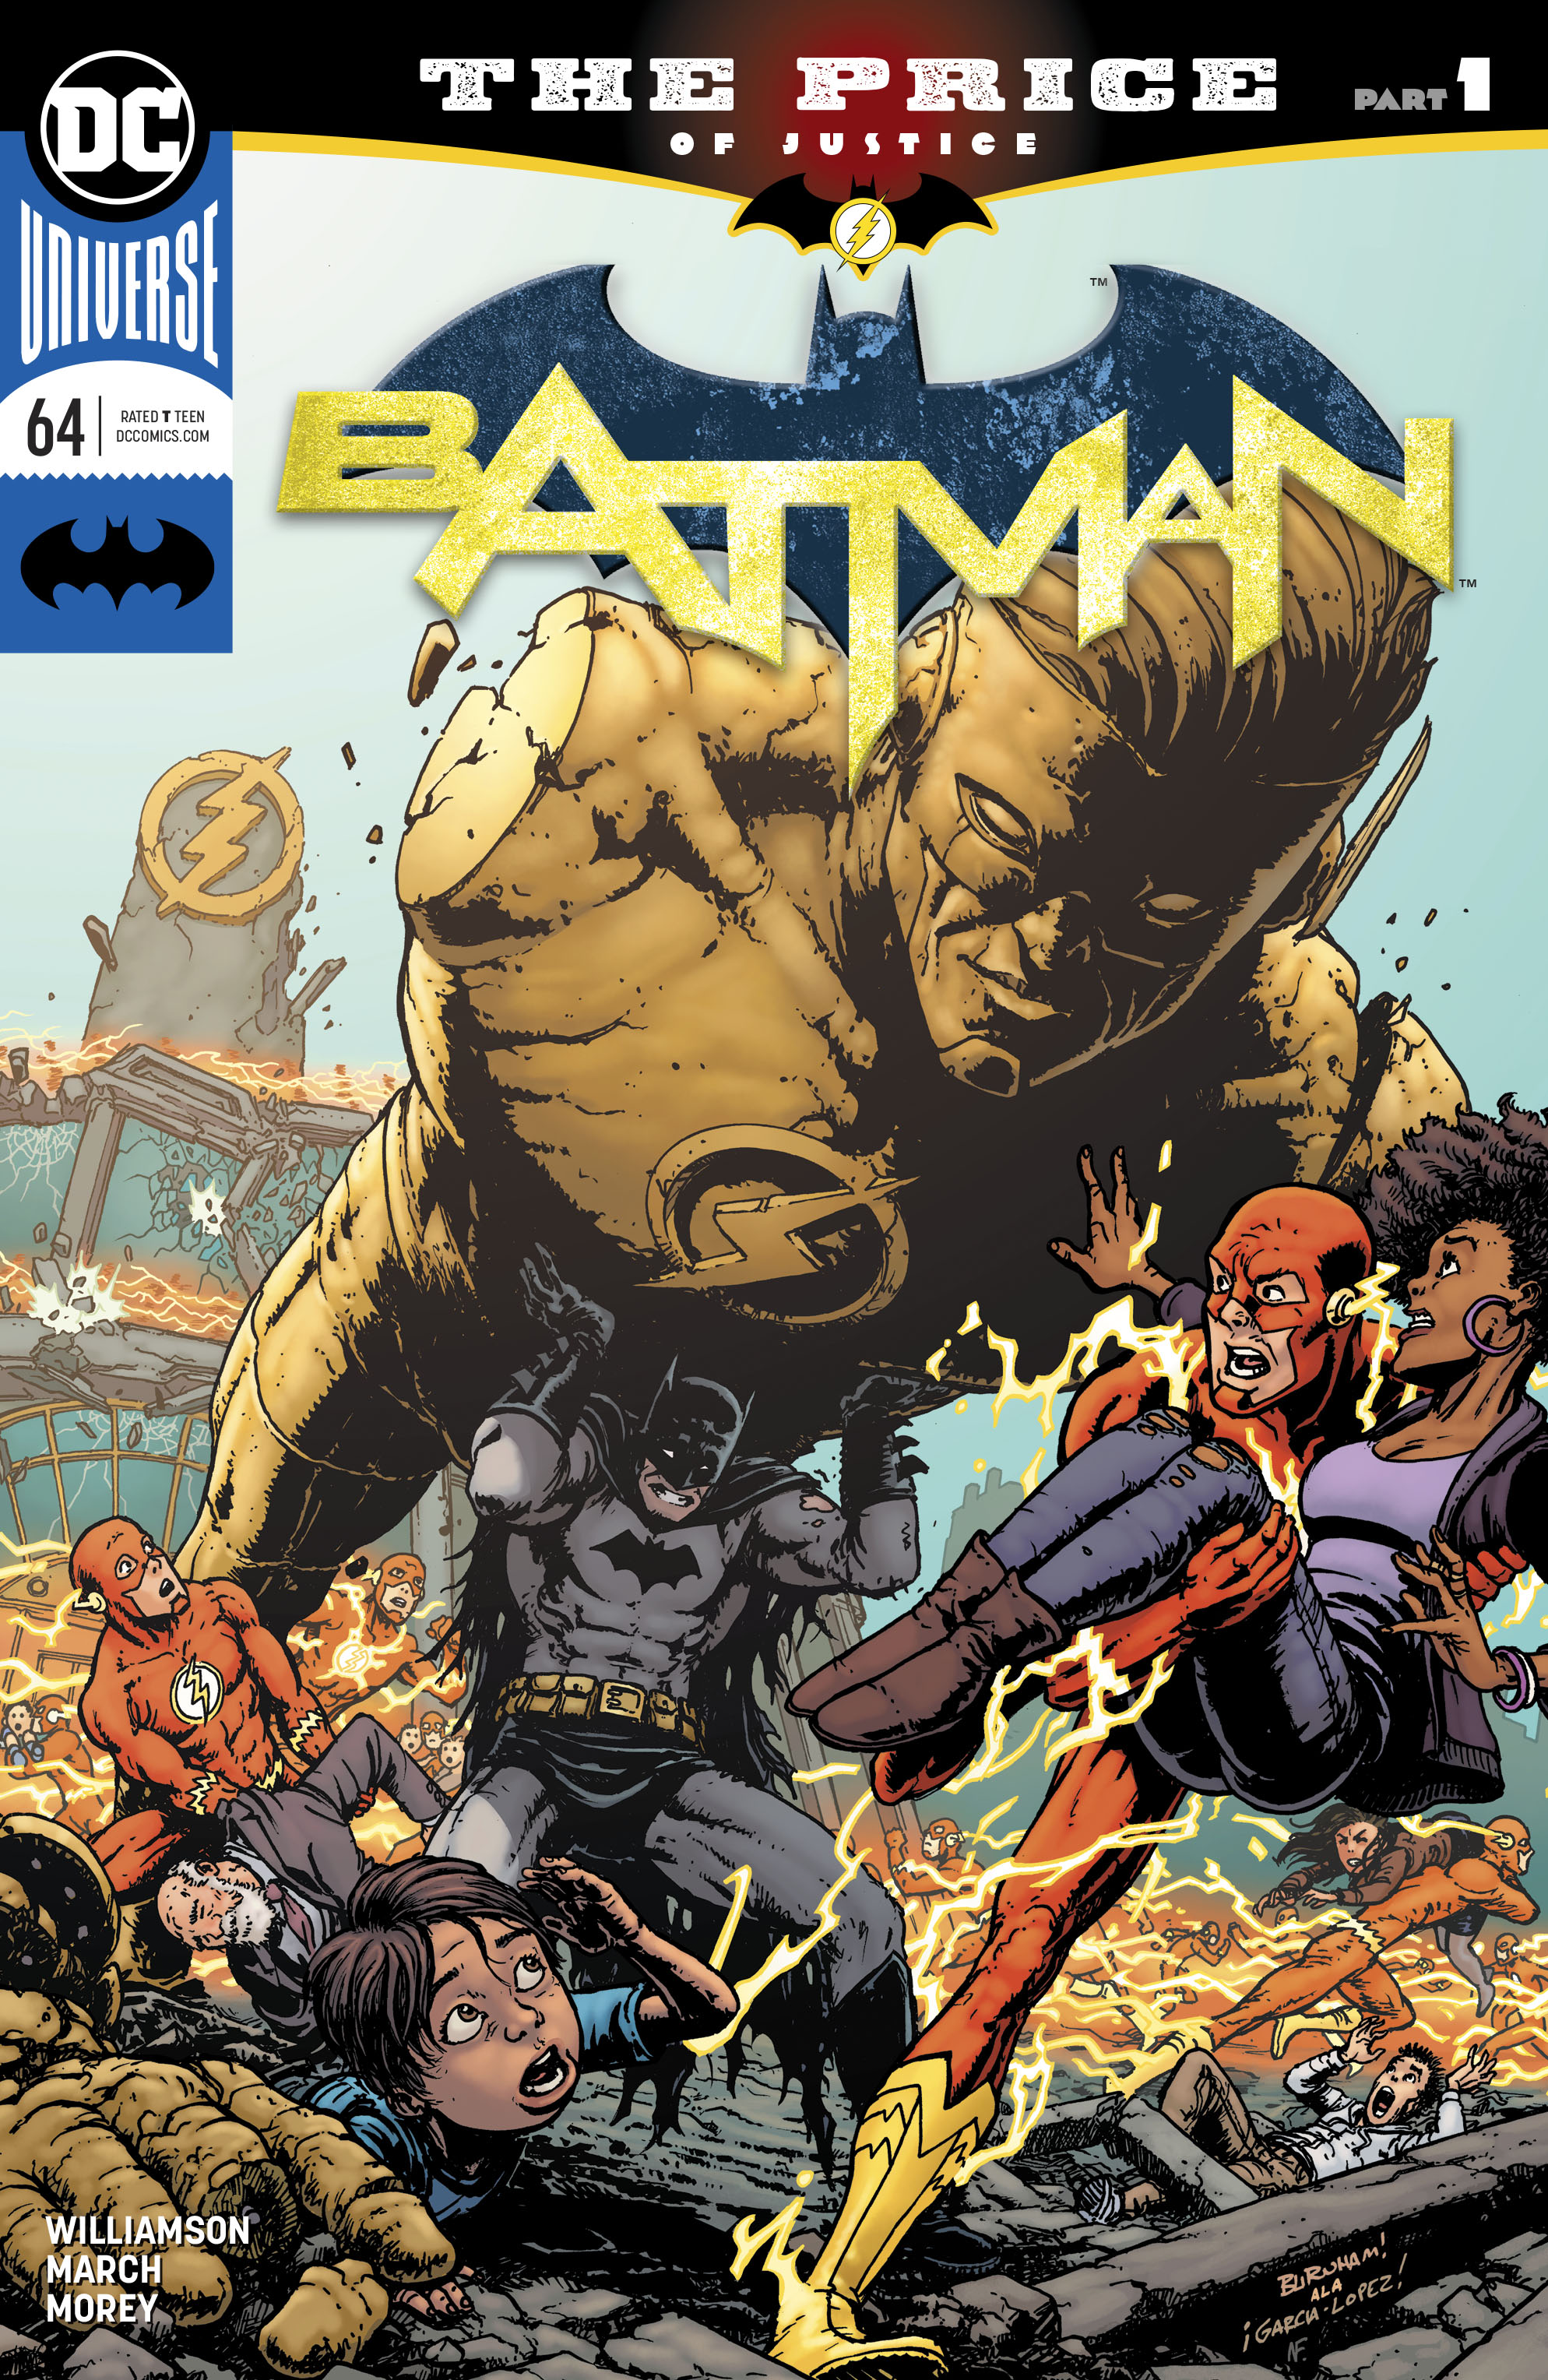 Batman 2016 Issue 64 | Read Batman 2016 Issue 64 comic online in high  quality. Read Full Comic online for free - Read comics online in high  quality .|